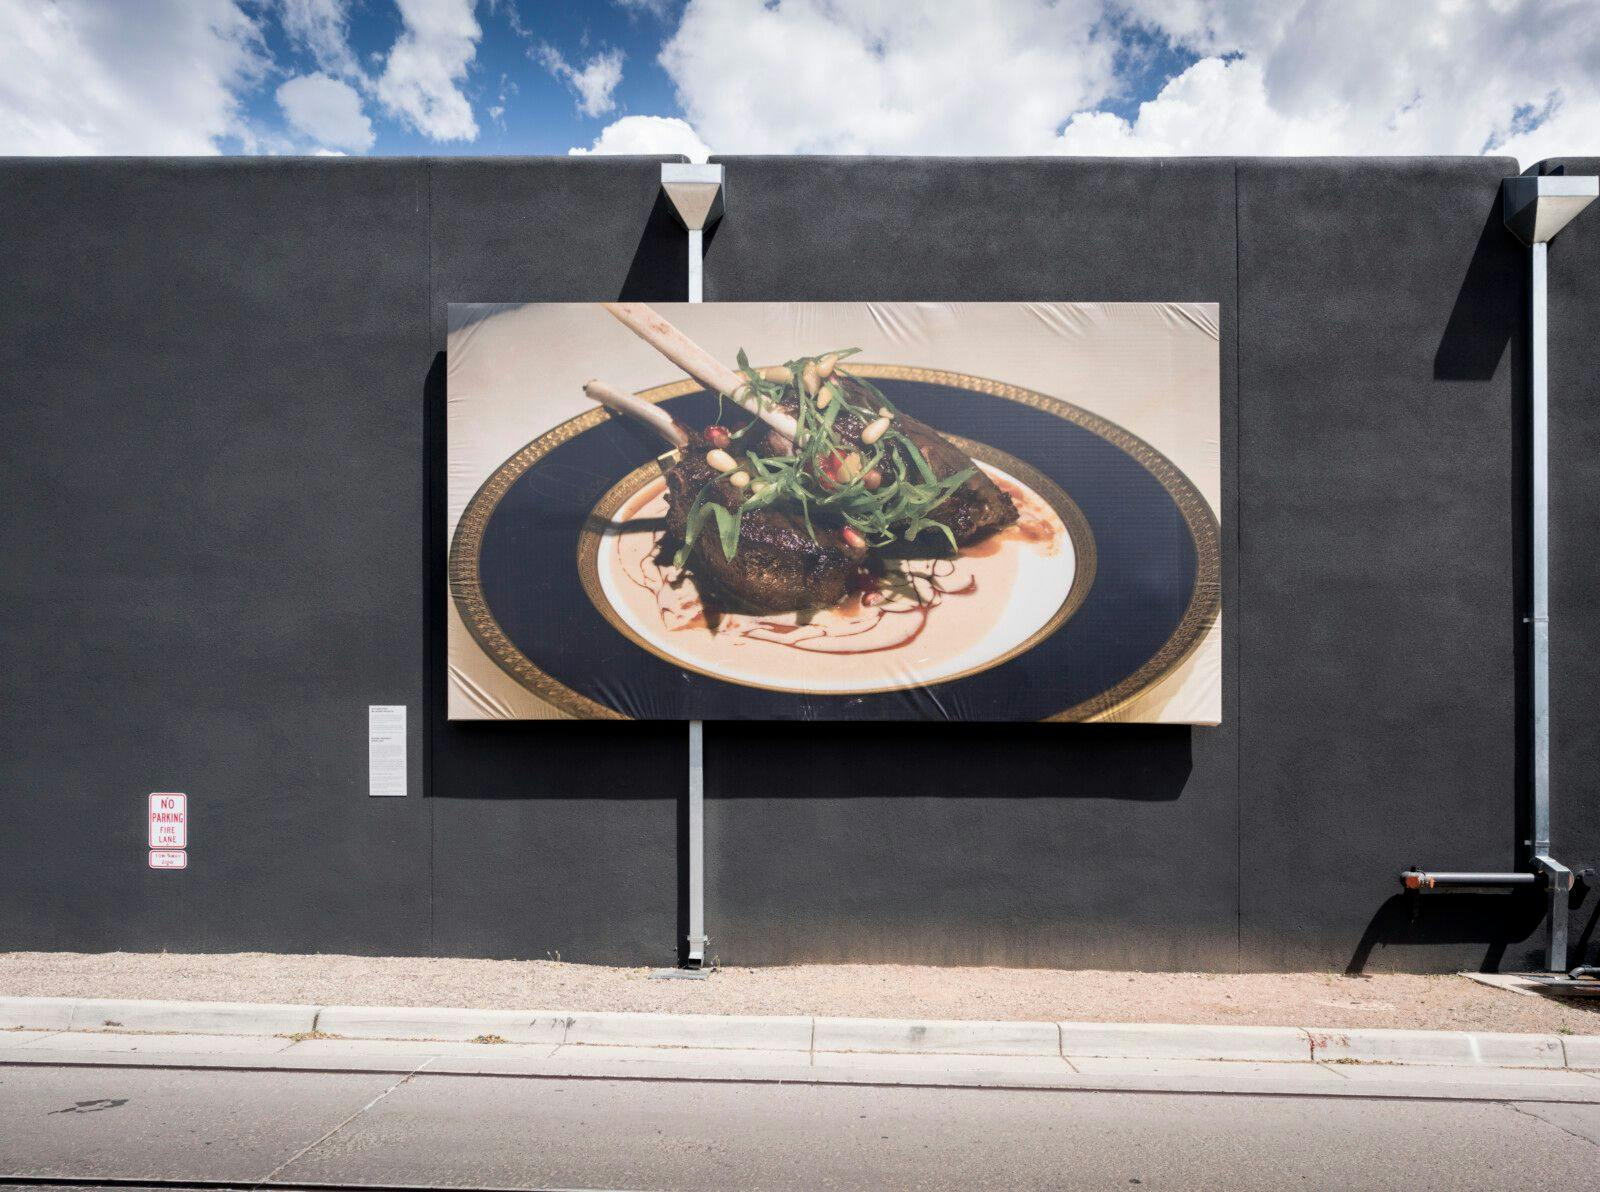 Michael Rakowitz, Ongoing, 2019 installed at SITE Santa Fe, photo by Eric Swanson